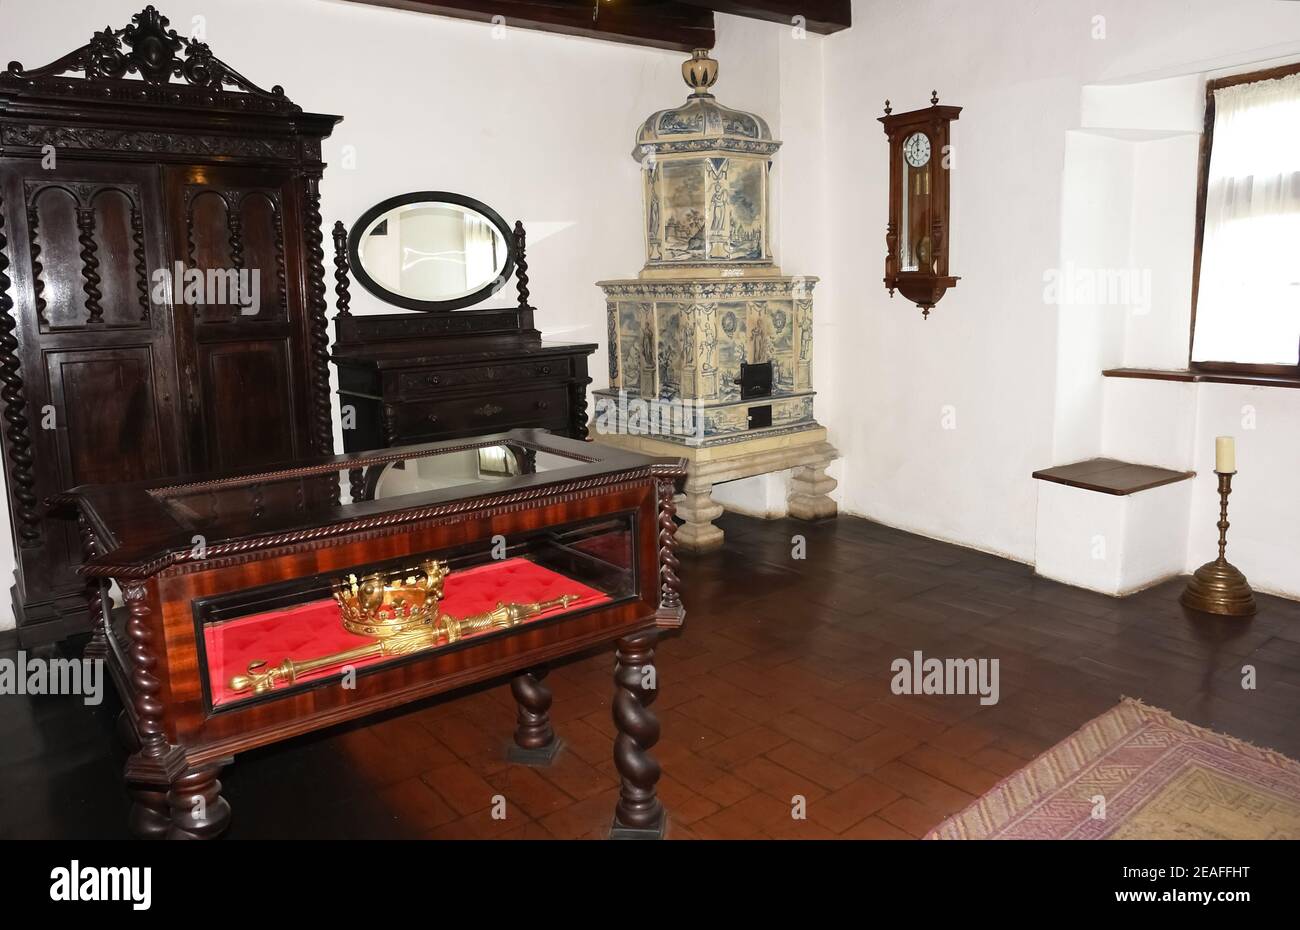 Interior of a room with an old tiled stove, carved wooden furniture, a golden crown and a scepter. Stock Photo